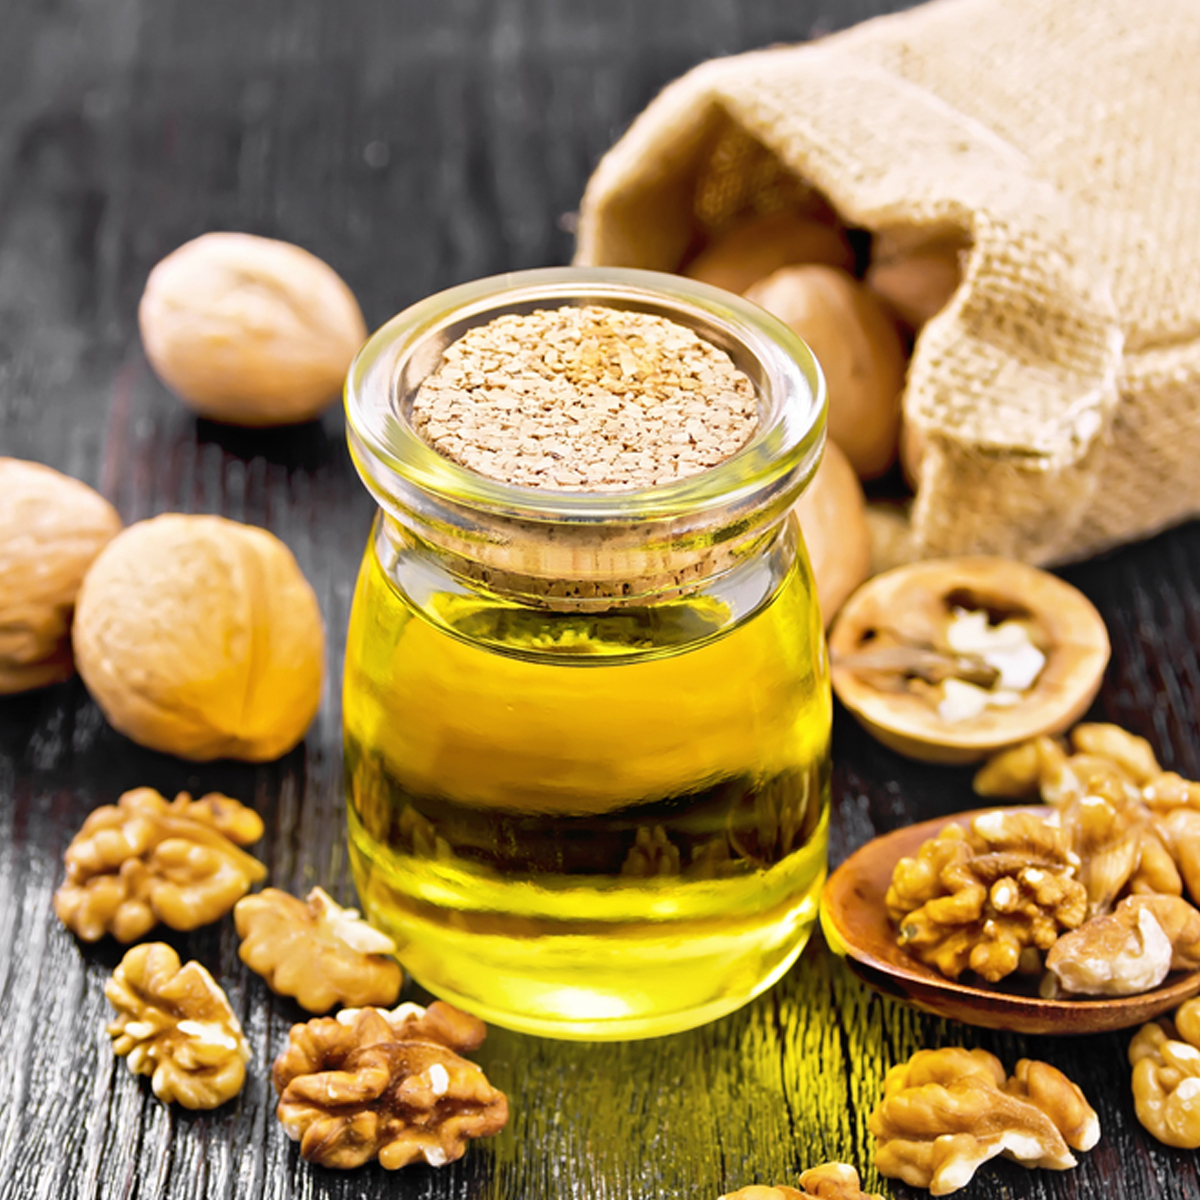 A jar of walnut oil surrounded by shelled walnuts with whole walnuts in the background.